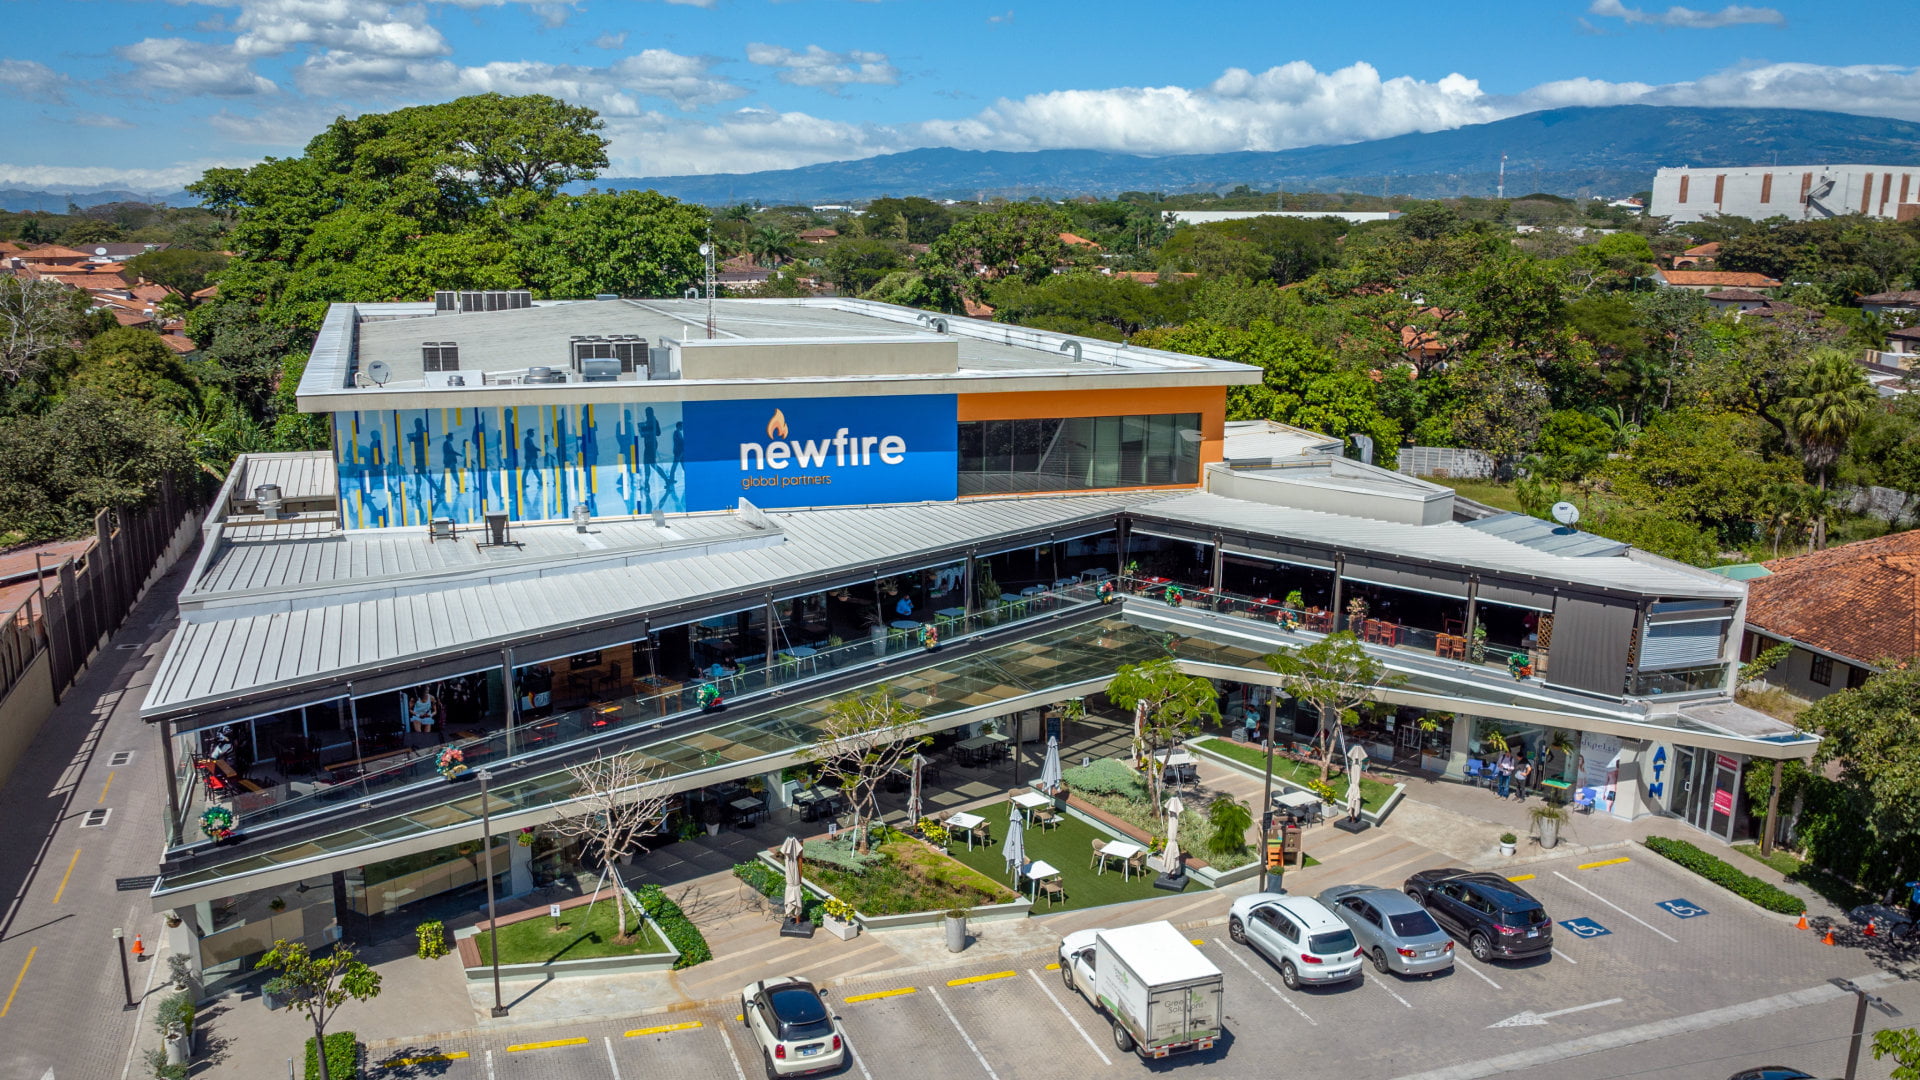 Information Technology Firm Newfire chooses Costa Rica for its First Expansion in Latin America with more than 100 Employees